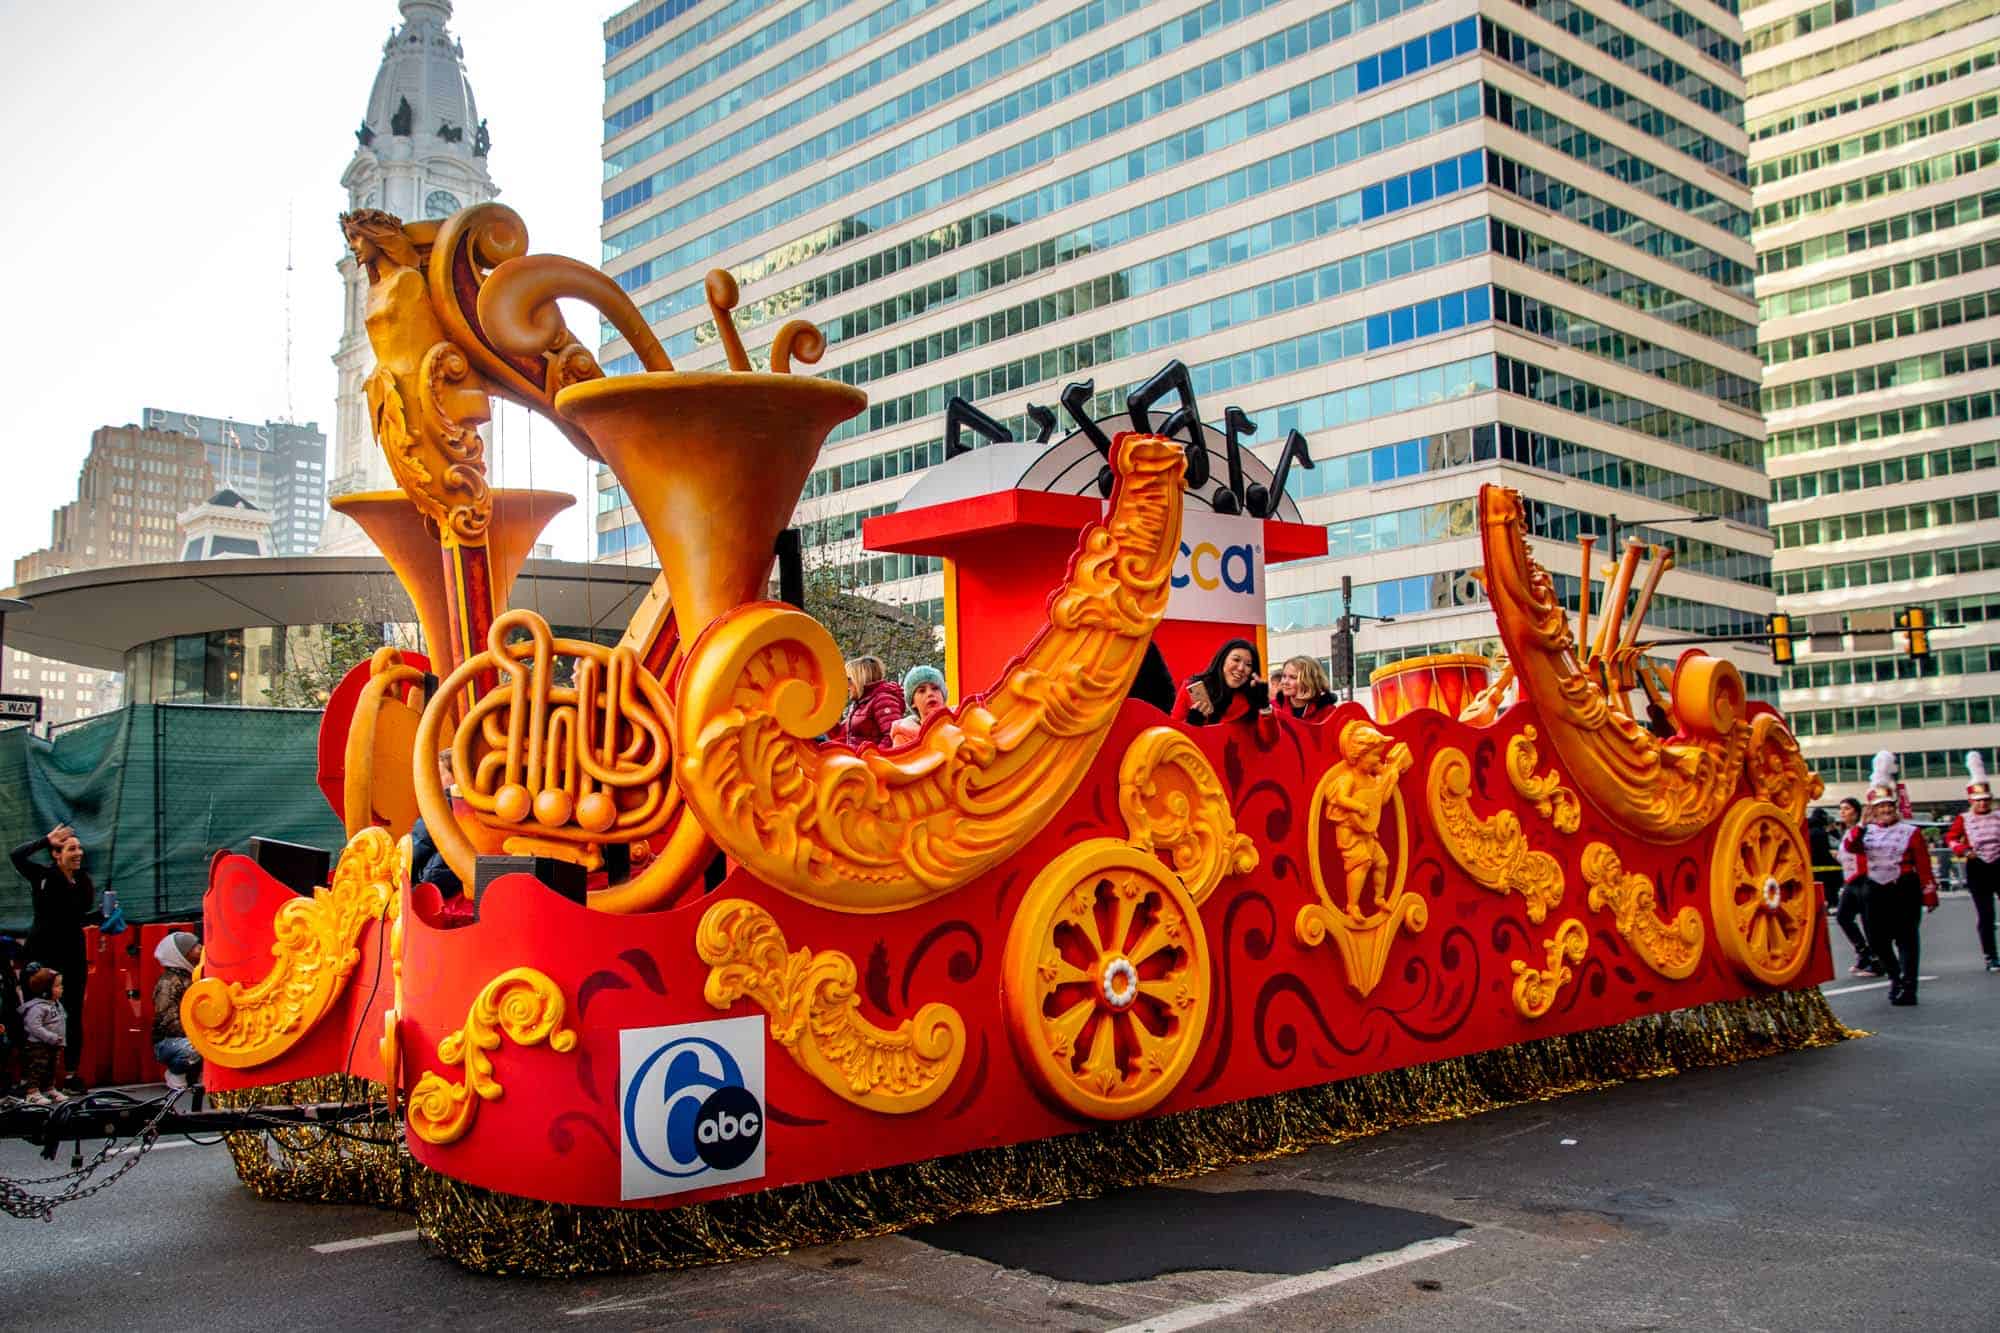 Music float in Thanksgiving parade with 6abc logo on it